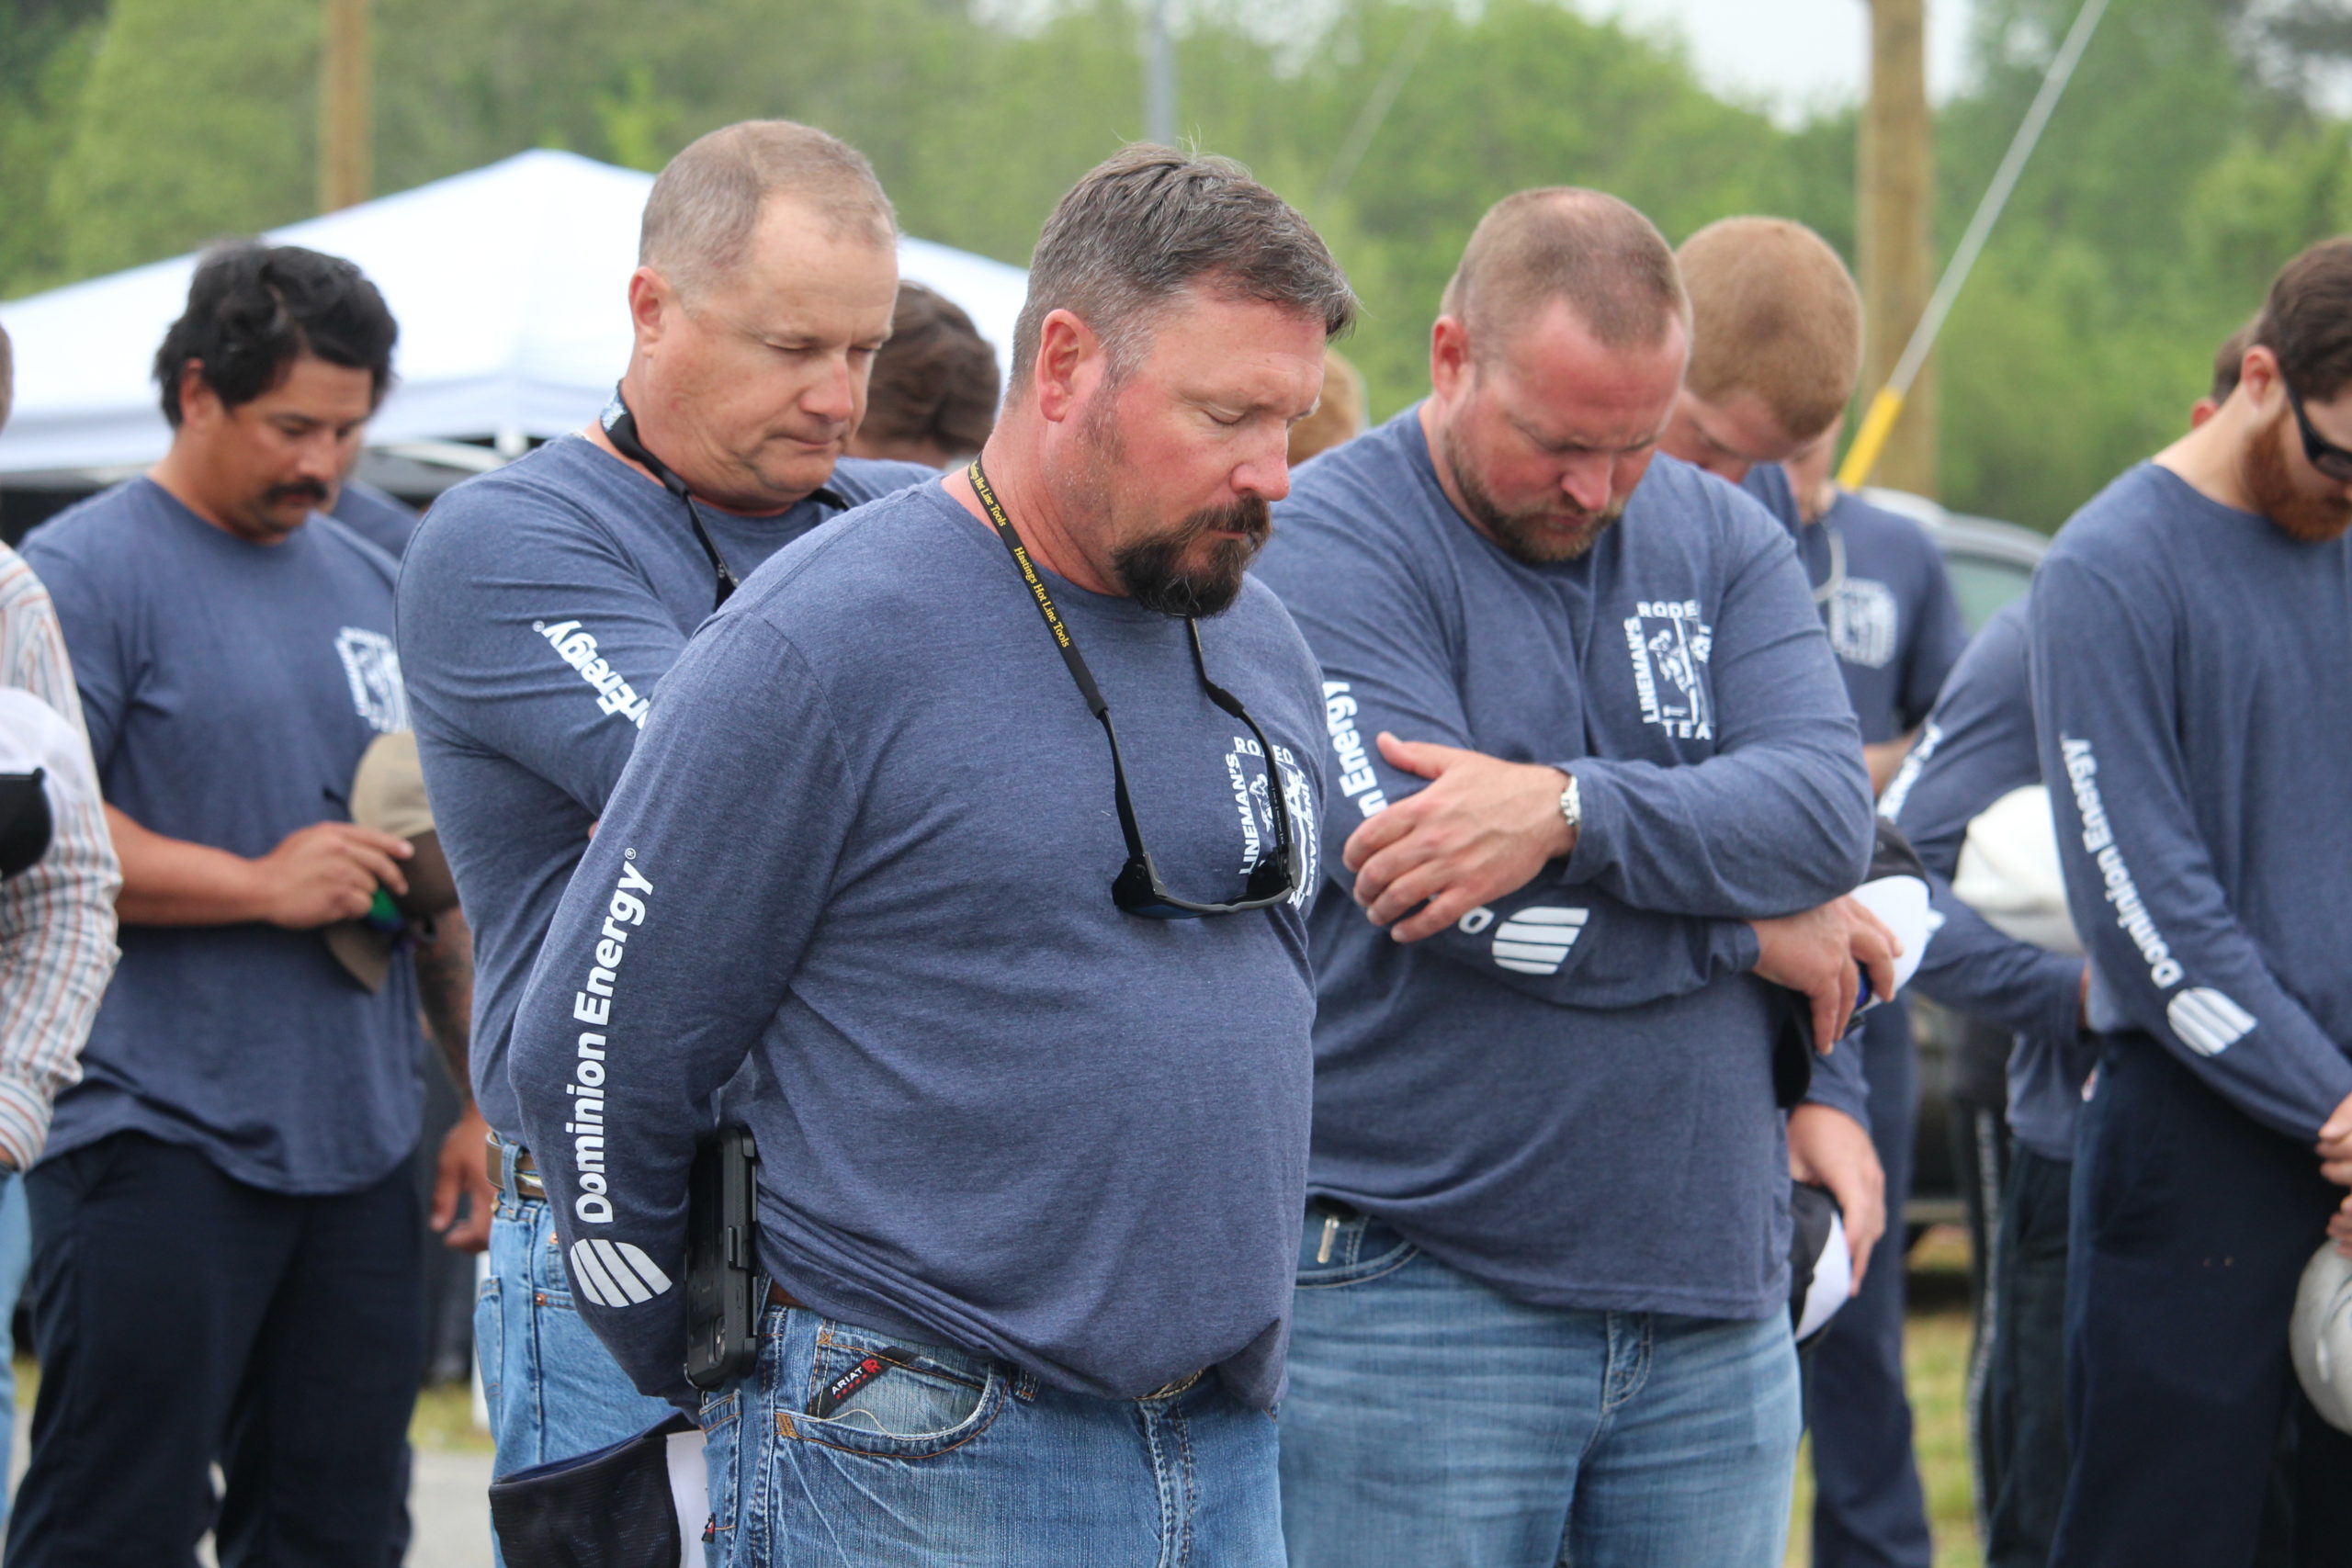 Dominion Energy linemen bow their heads respectfully during the morning invocation by Pastor Randy Holloway.